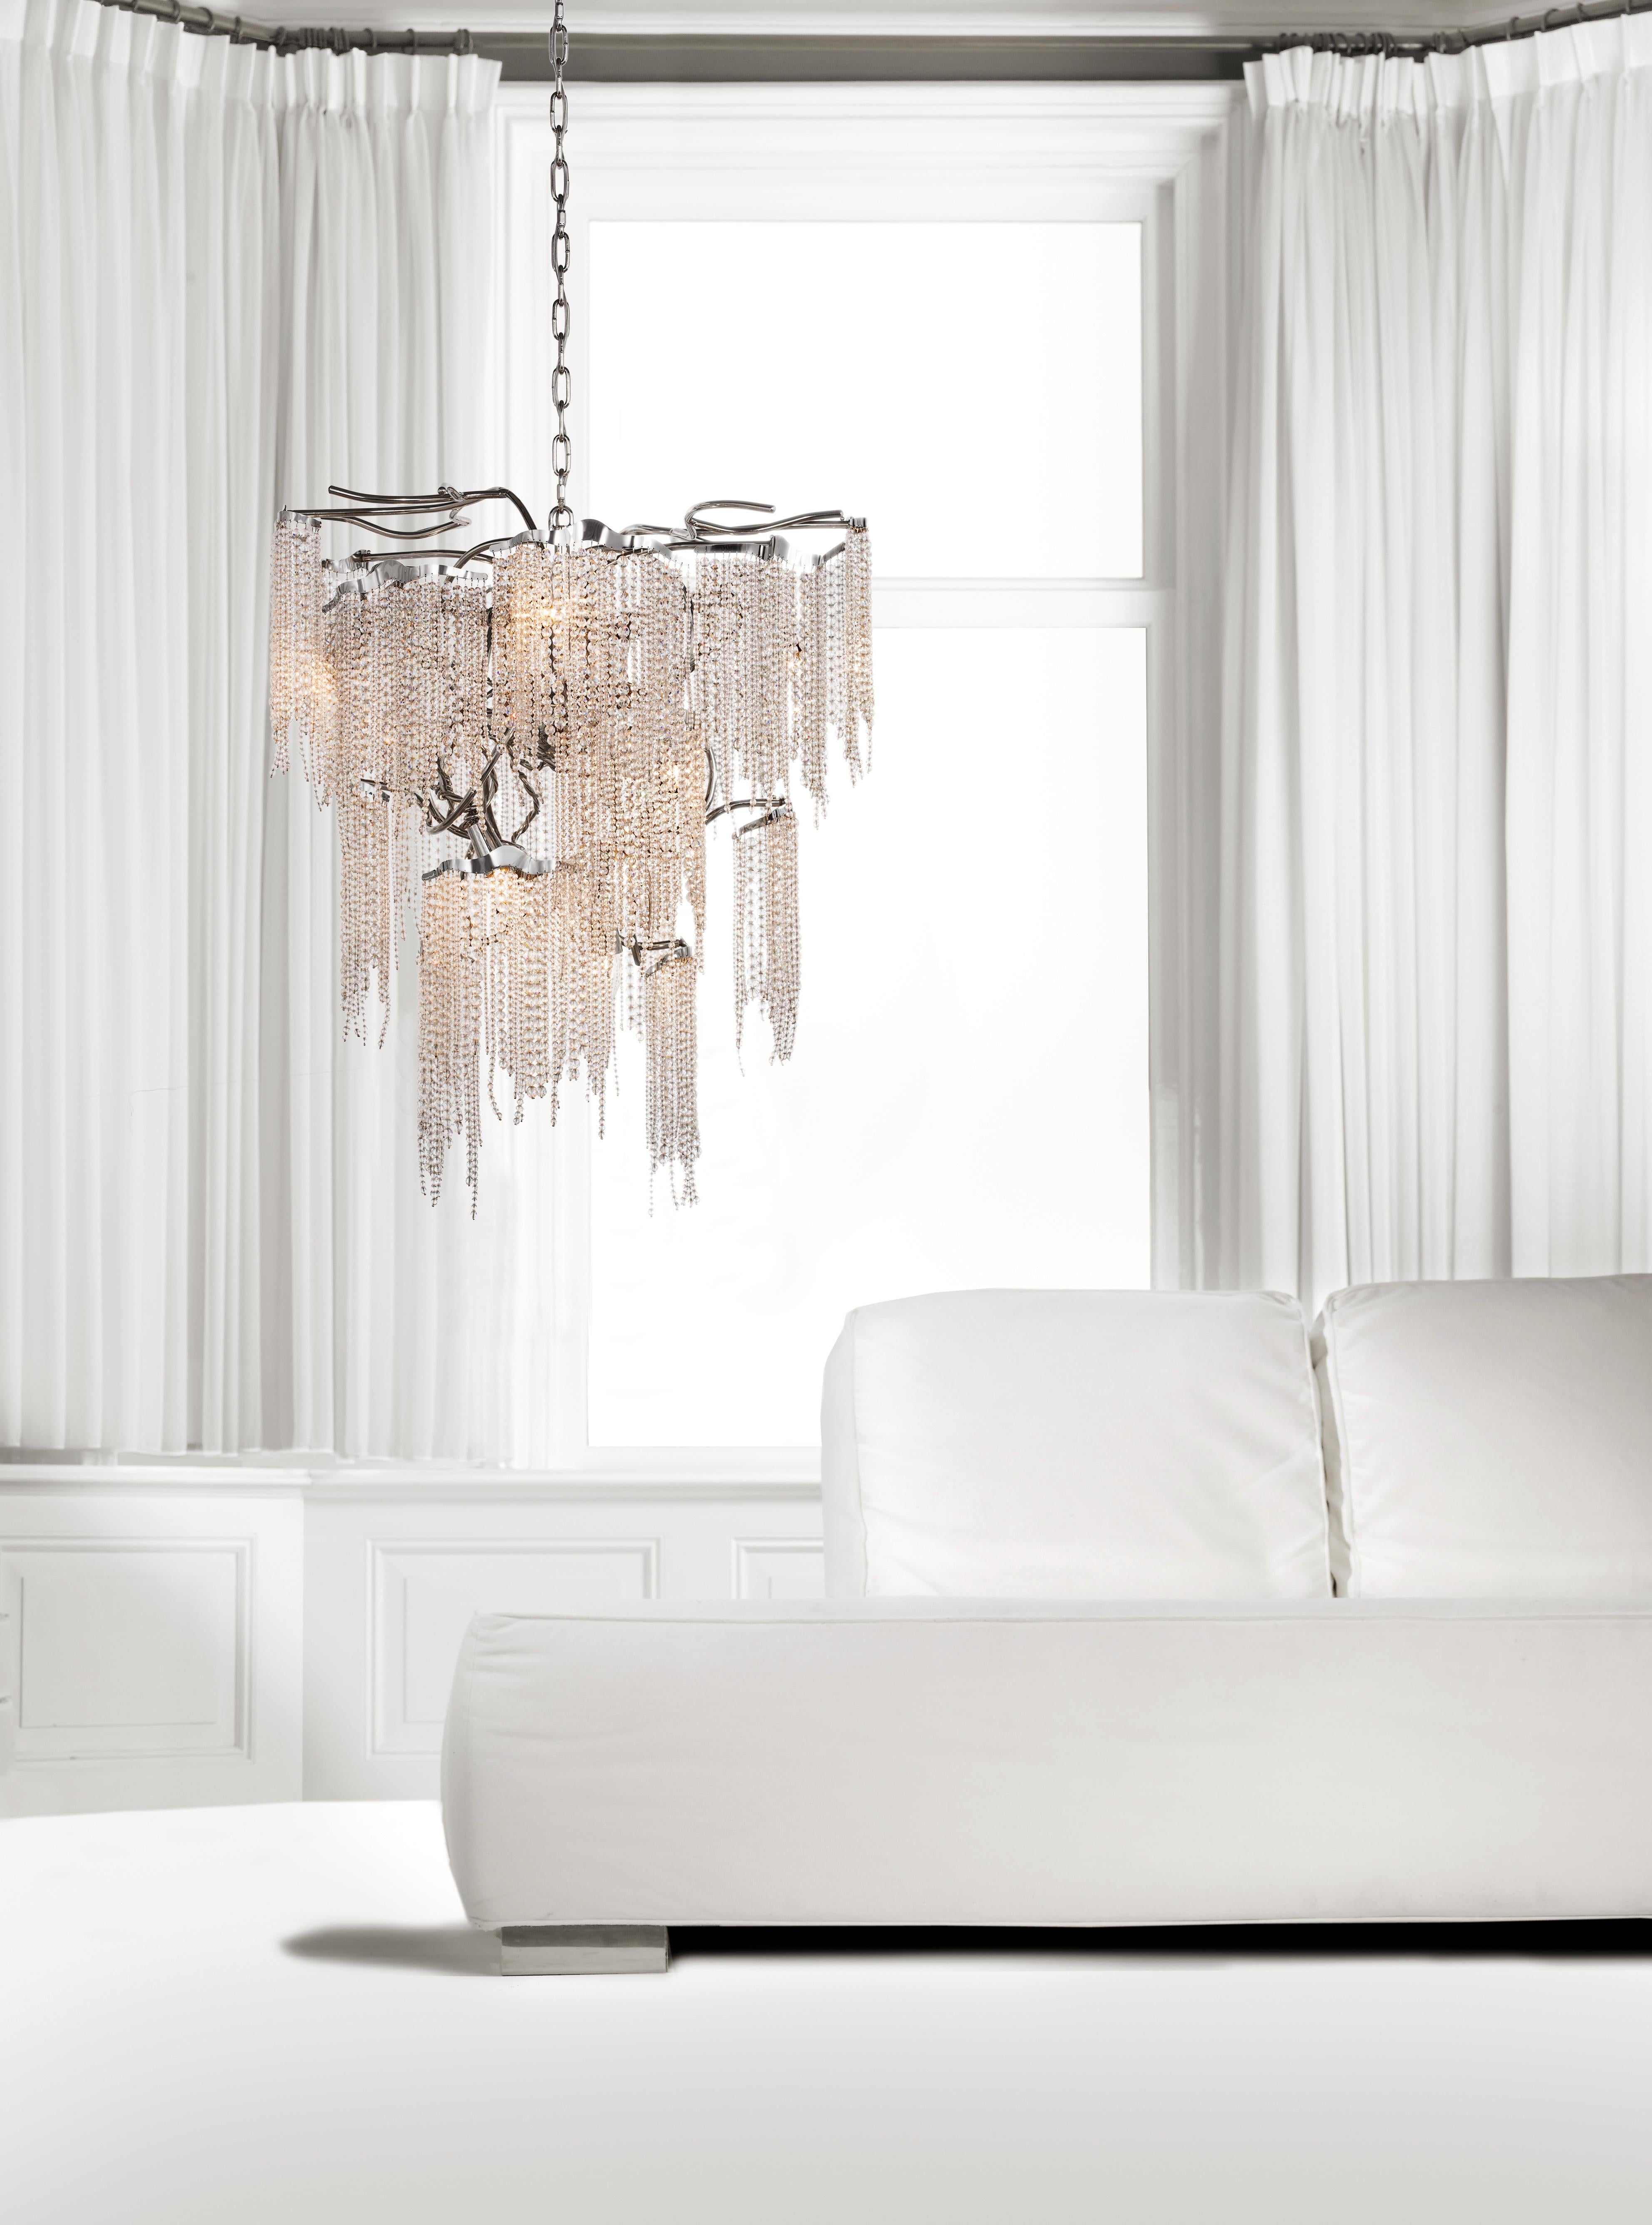 This modern chandelier in a conical shape, in a nickel finish with crystals is part of the Victoria collection, designed by William Brand of Brand van Egmond.

Before you see it, the sparkling light reaches your eyes in full splendour. The fresh